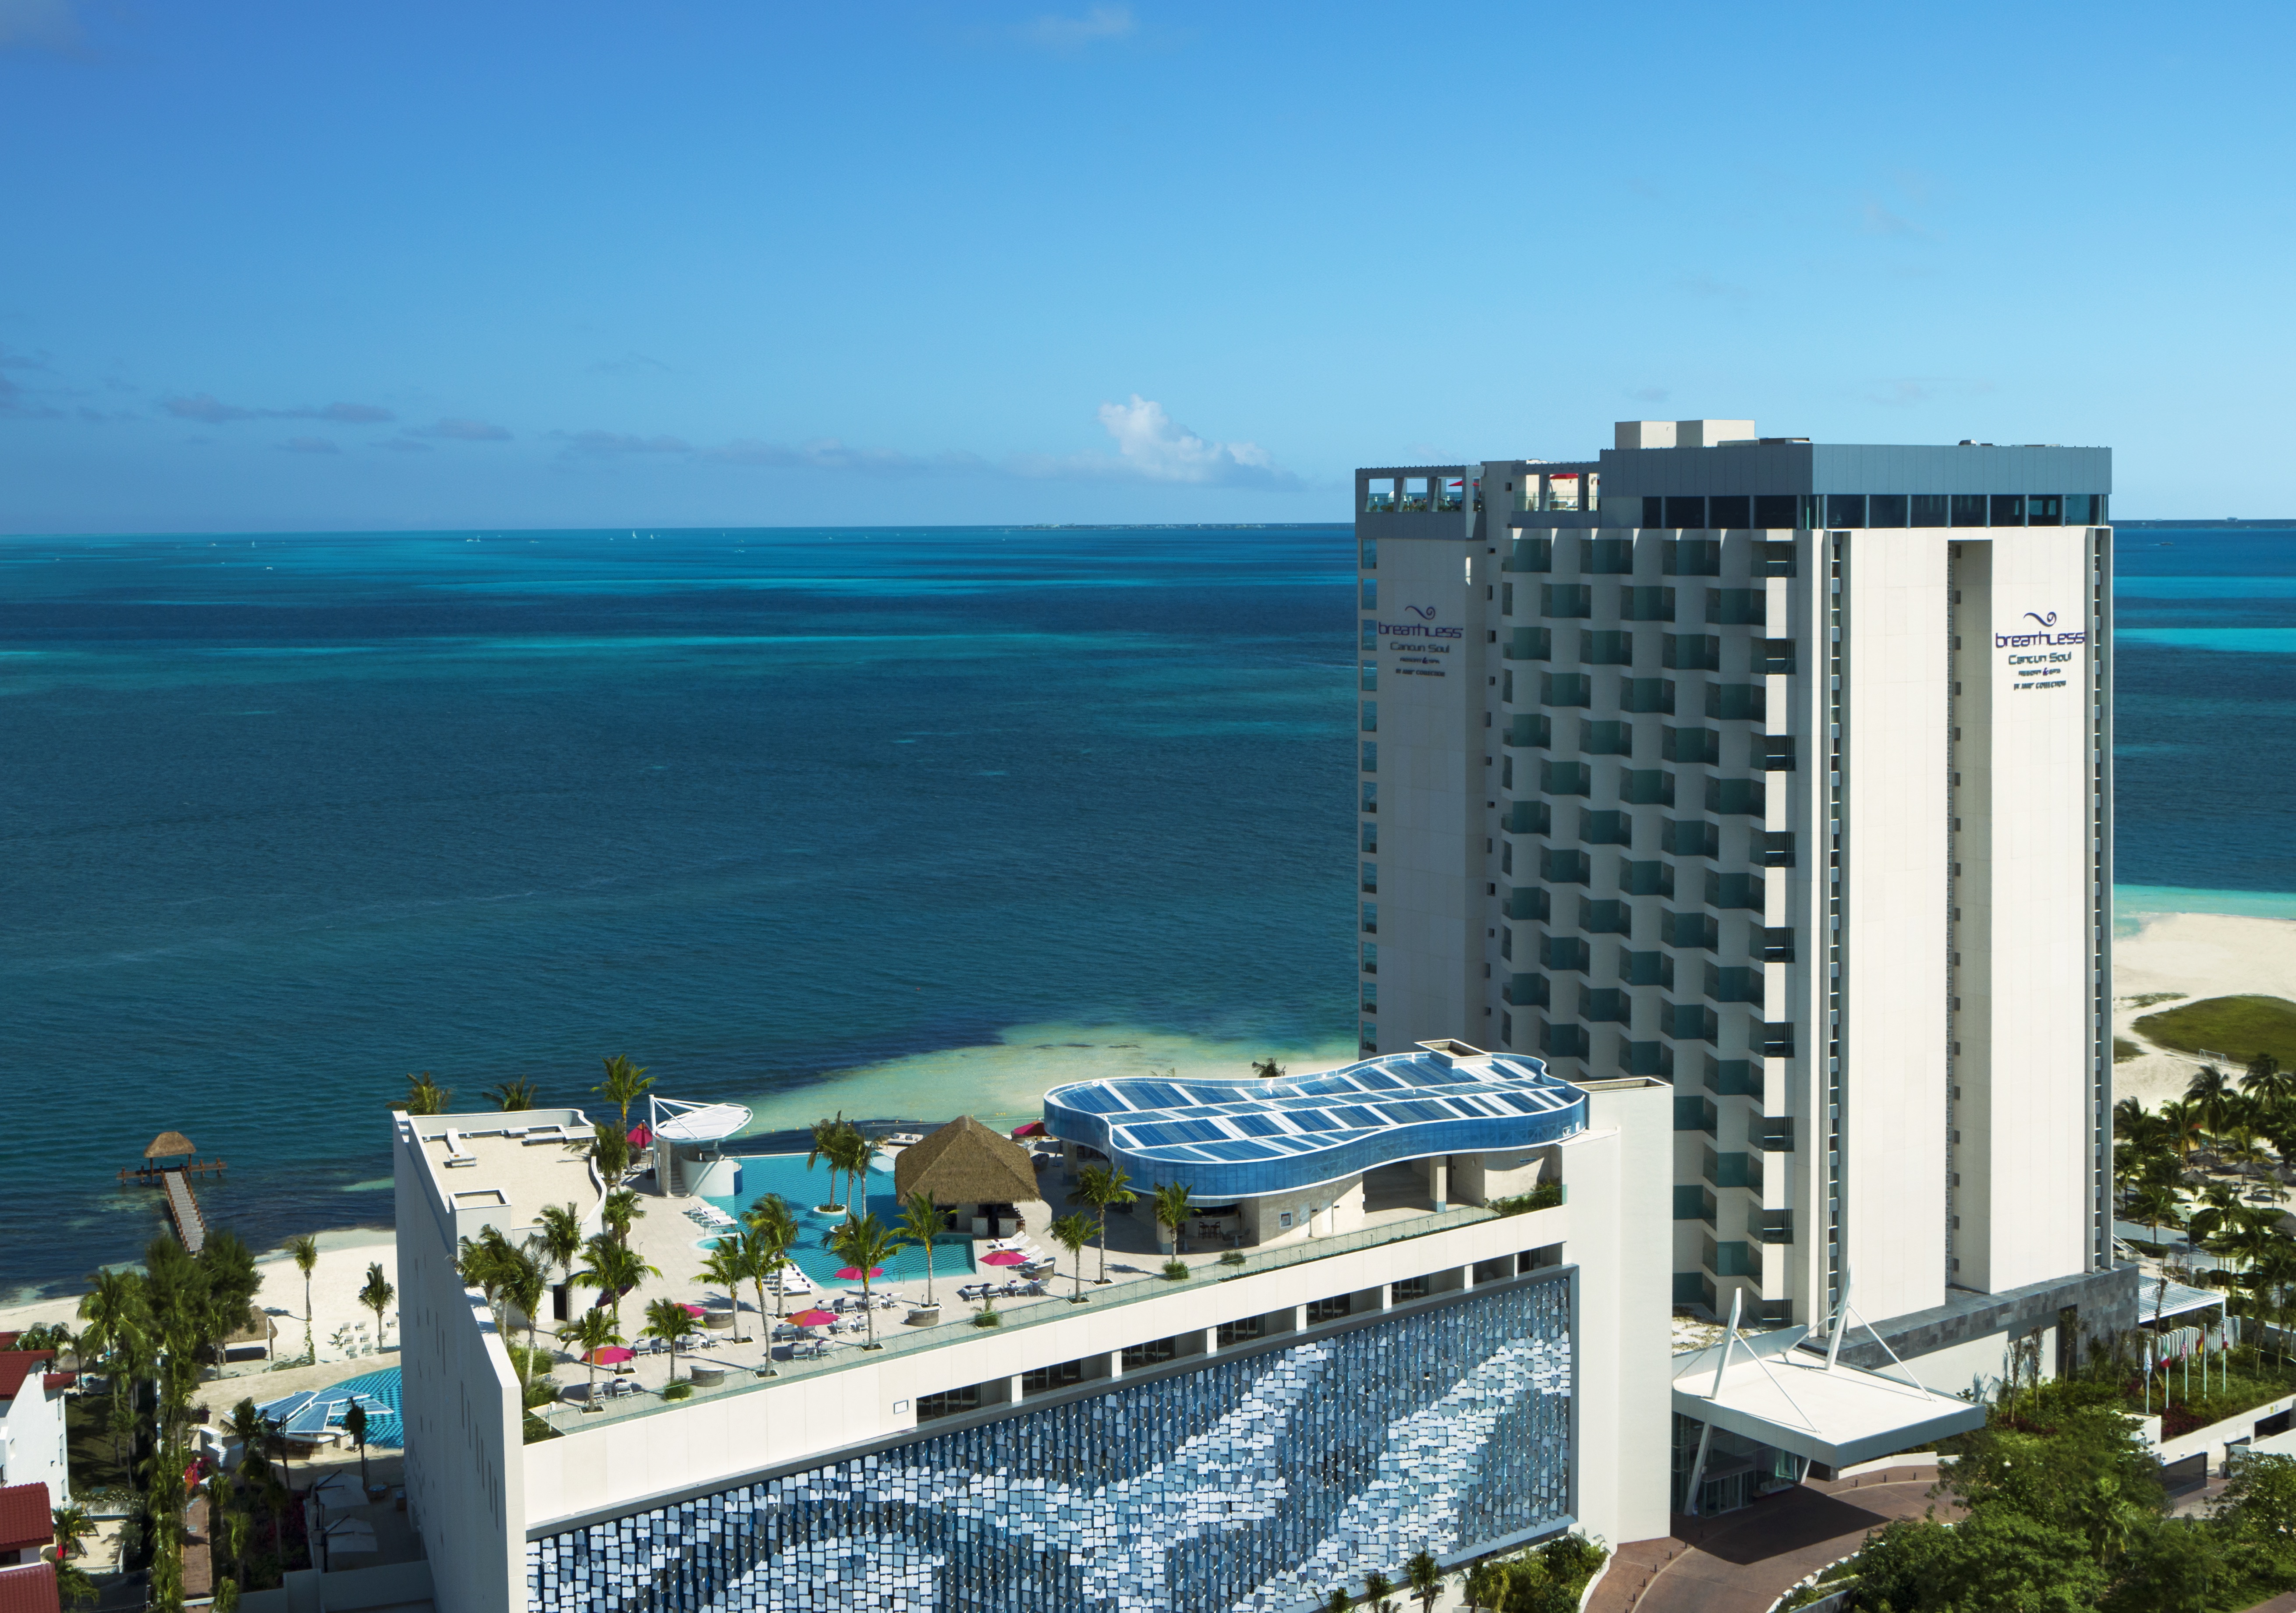 Breathless Cancun Soul Resort and Spa, Top Summer Destination